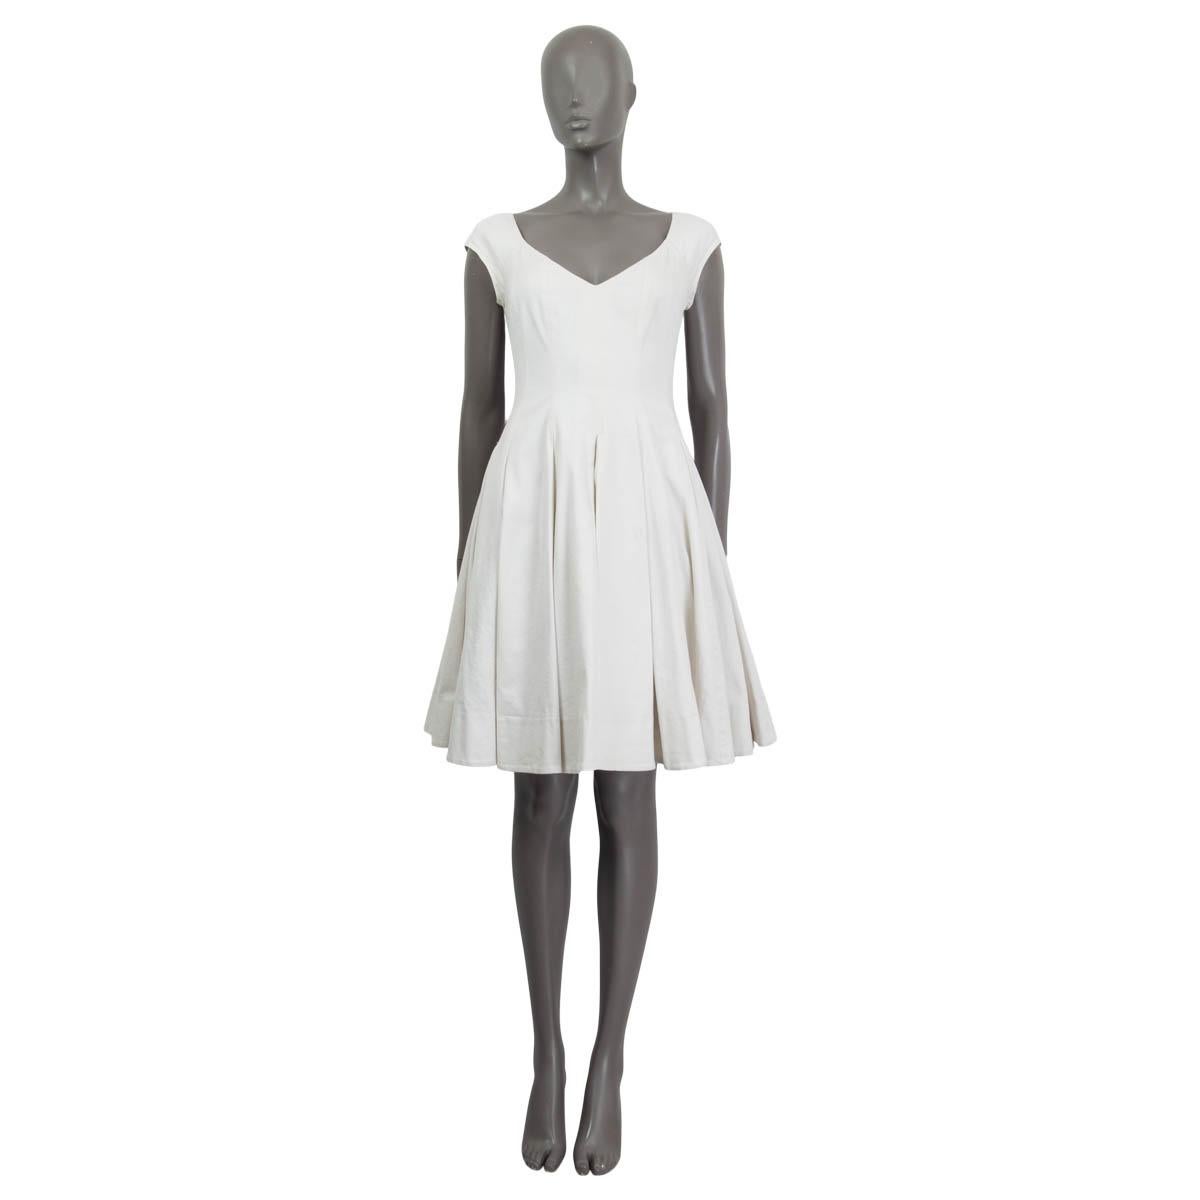 100% authentic Ralph Lauren cap sleeve pleated flared dress in white cotton (98%) and elastane (2%). Closes with a zipper on the back and is lined in white thin cotton. Has been worn and is in excellent condition. 

Measurements
Tag Size	4
Size	XS -